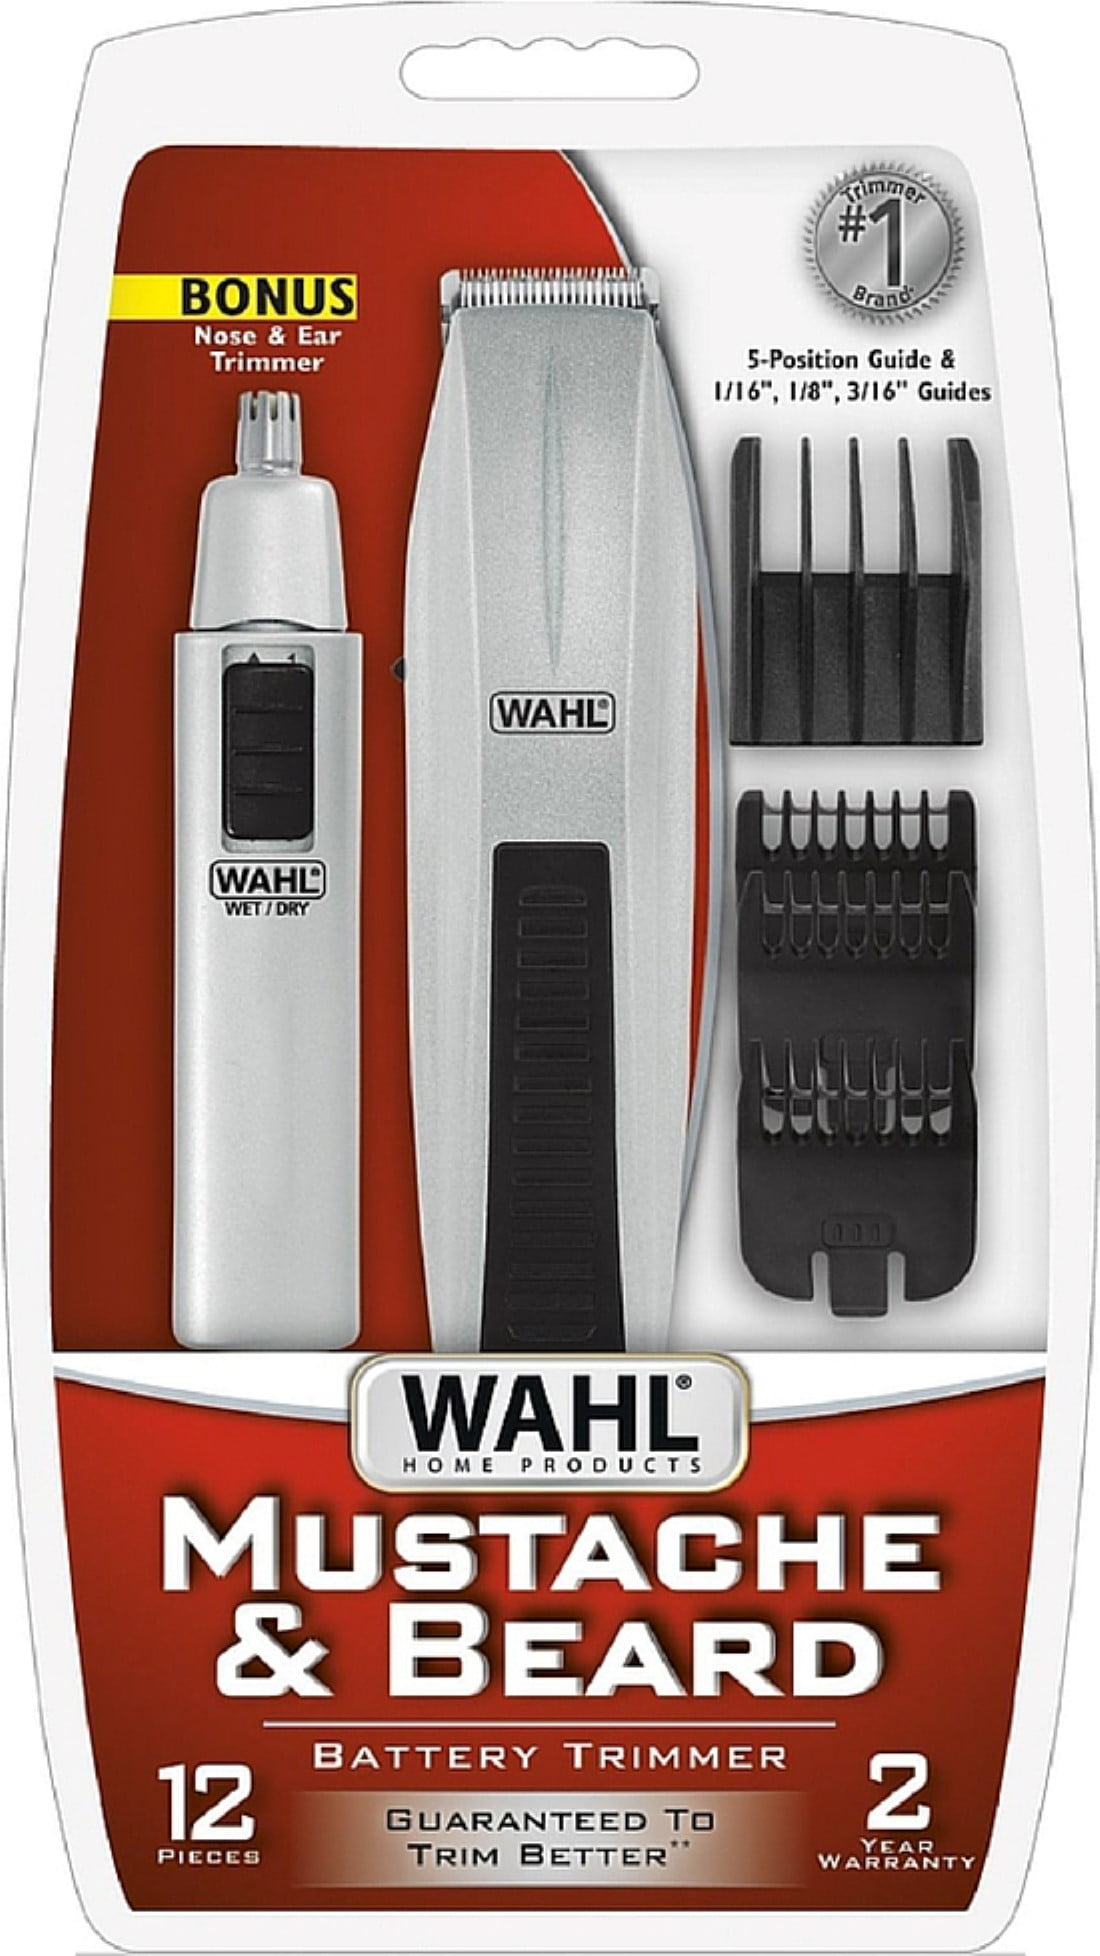 wahl beard trimmer battery replacement